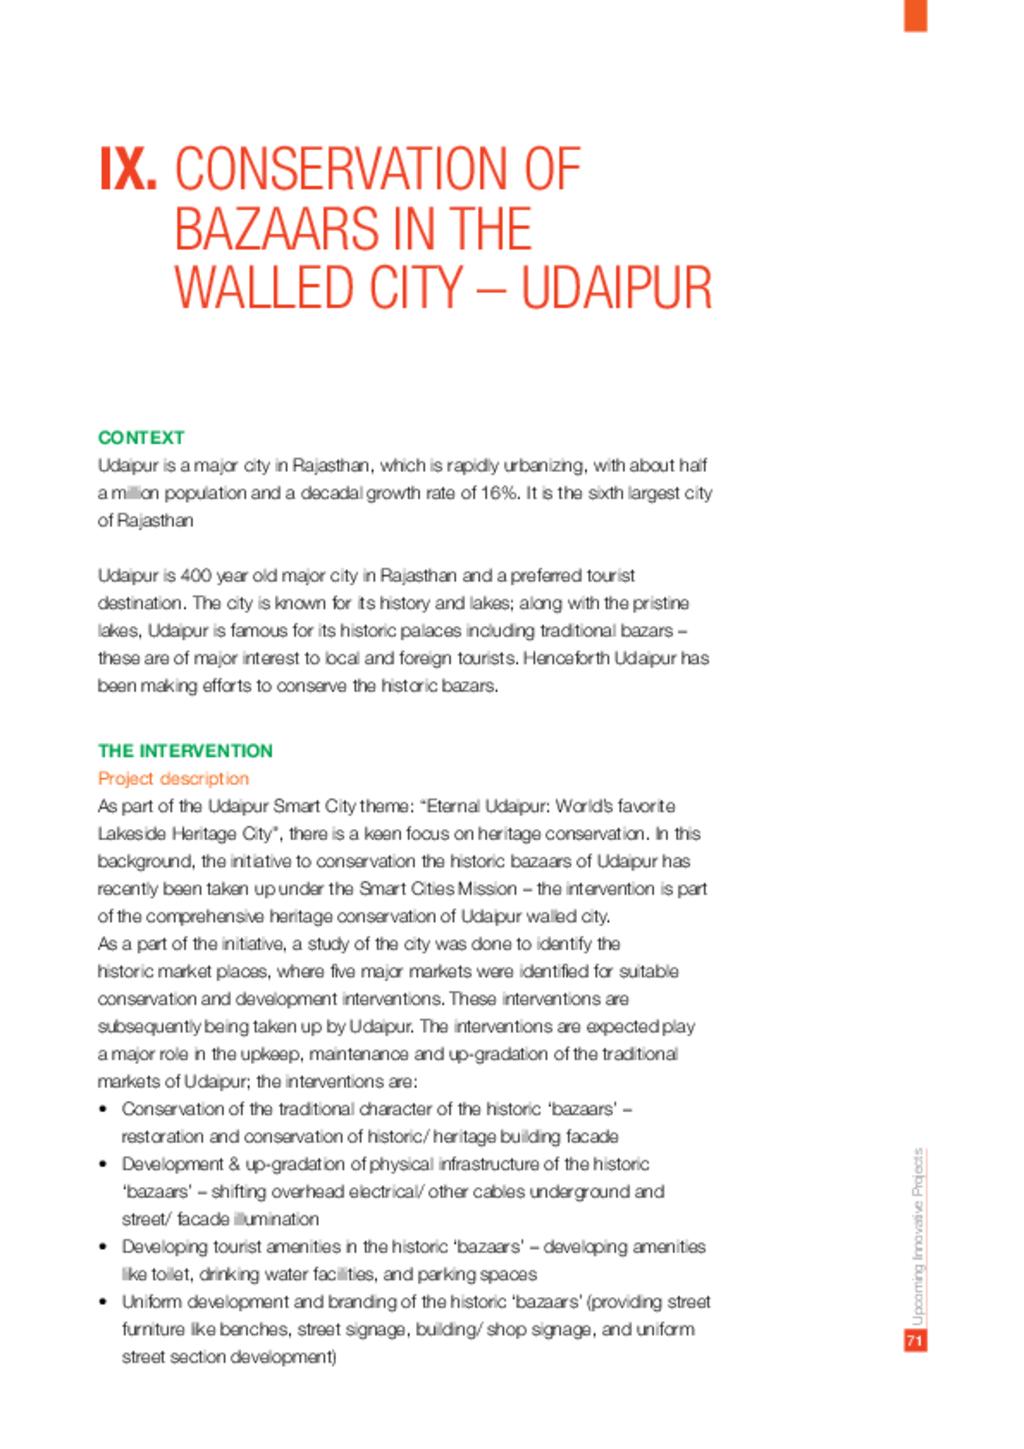 Conservation of bazaars in the walled City – Udaipur